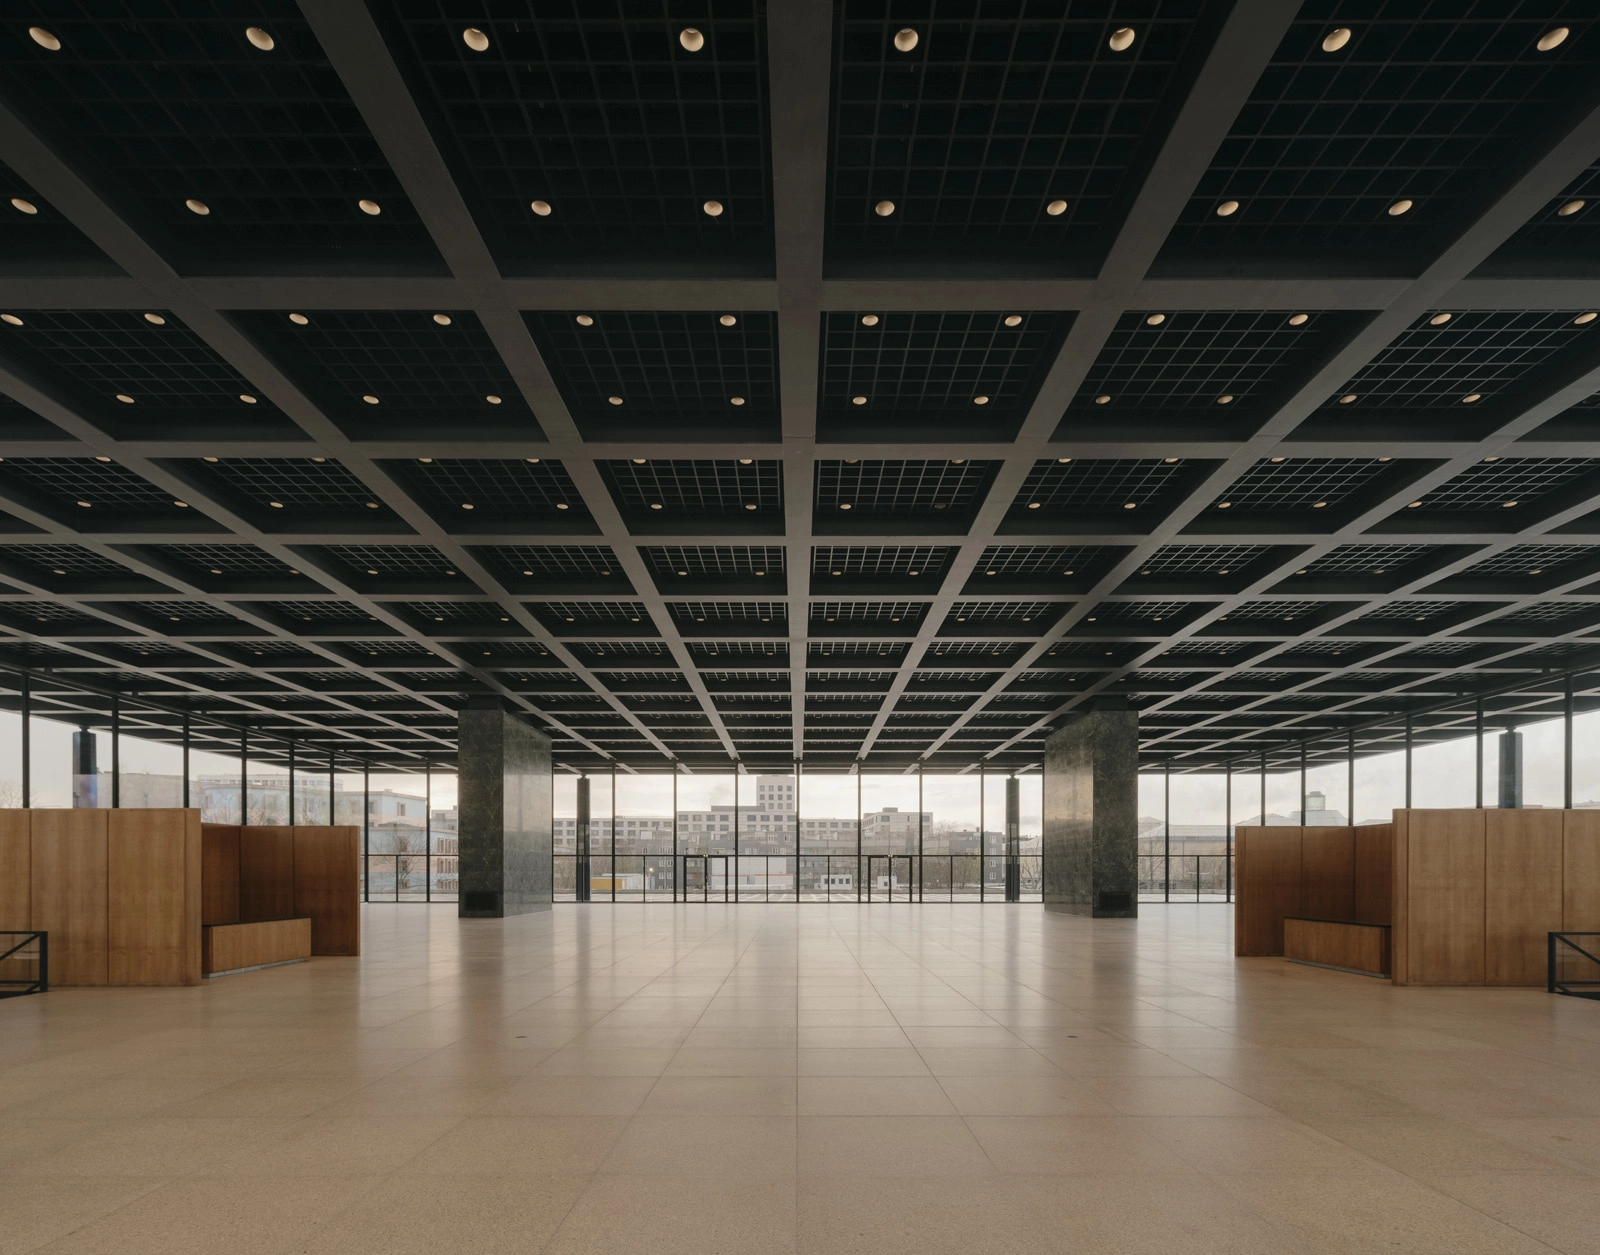 Image of 20210625 Chipperfield NeueNationalgalerieRefurbishment 05 in Neue Nationalgalerie Refurbishment - Cosentino